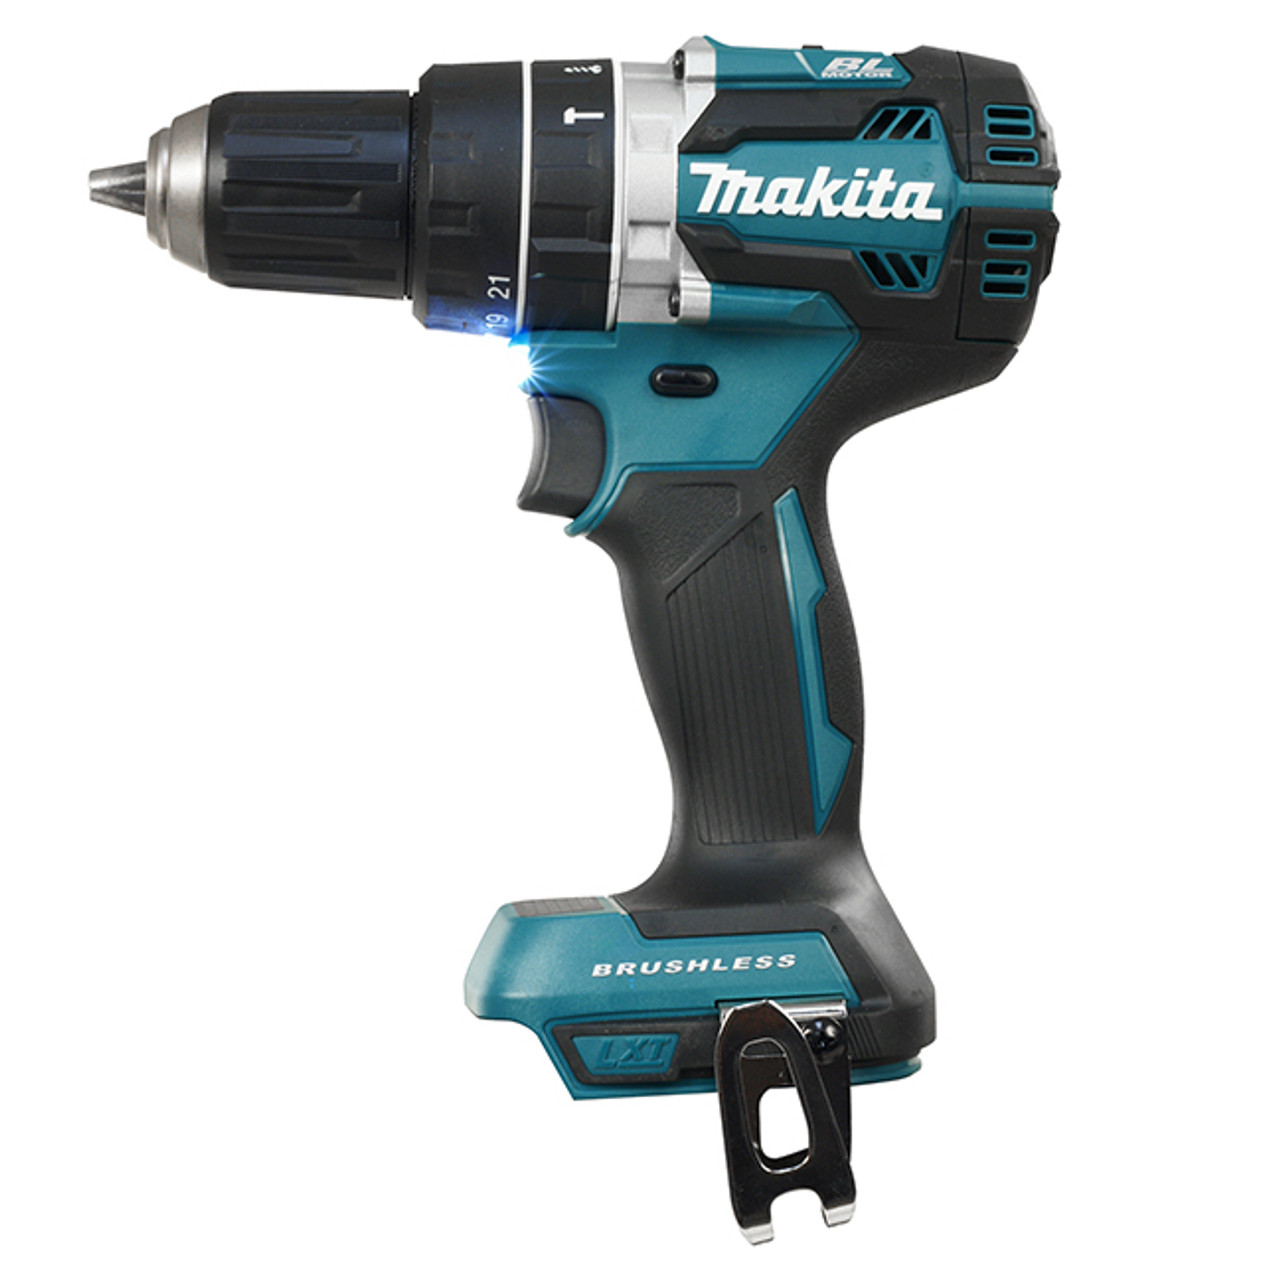 Makita DHP484Z 1/2 Hammer Drill Driver With Brushless Motor